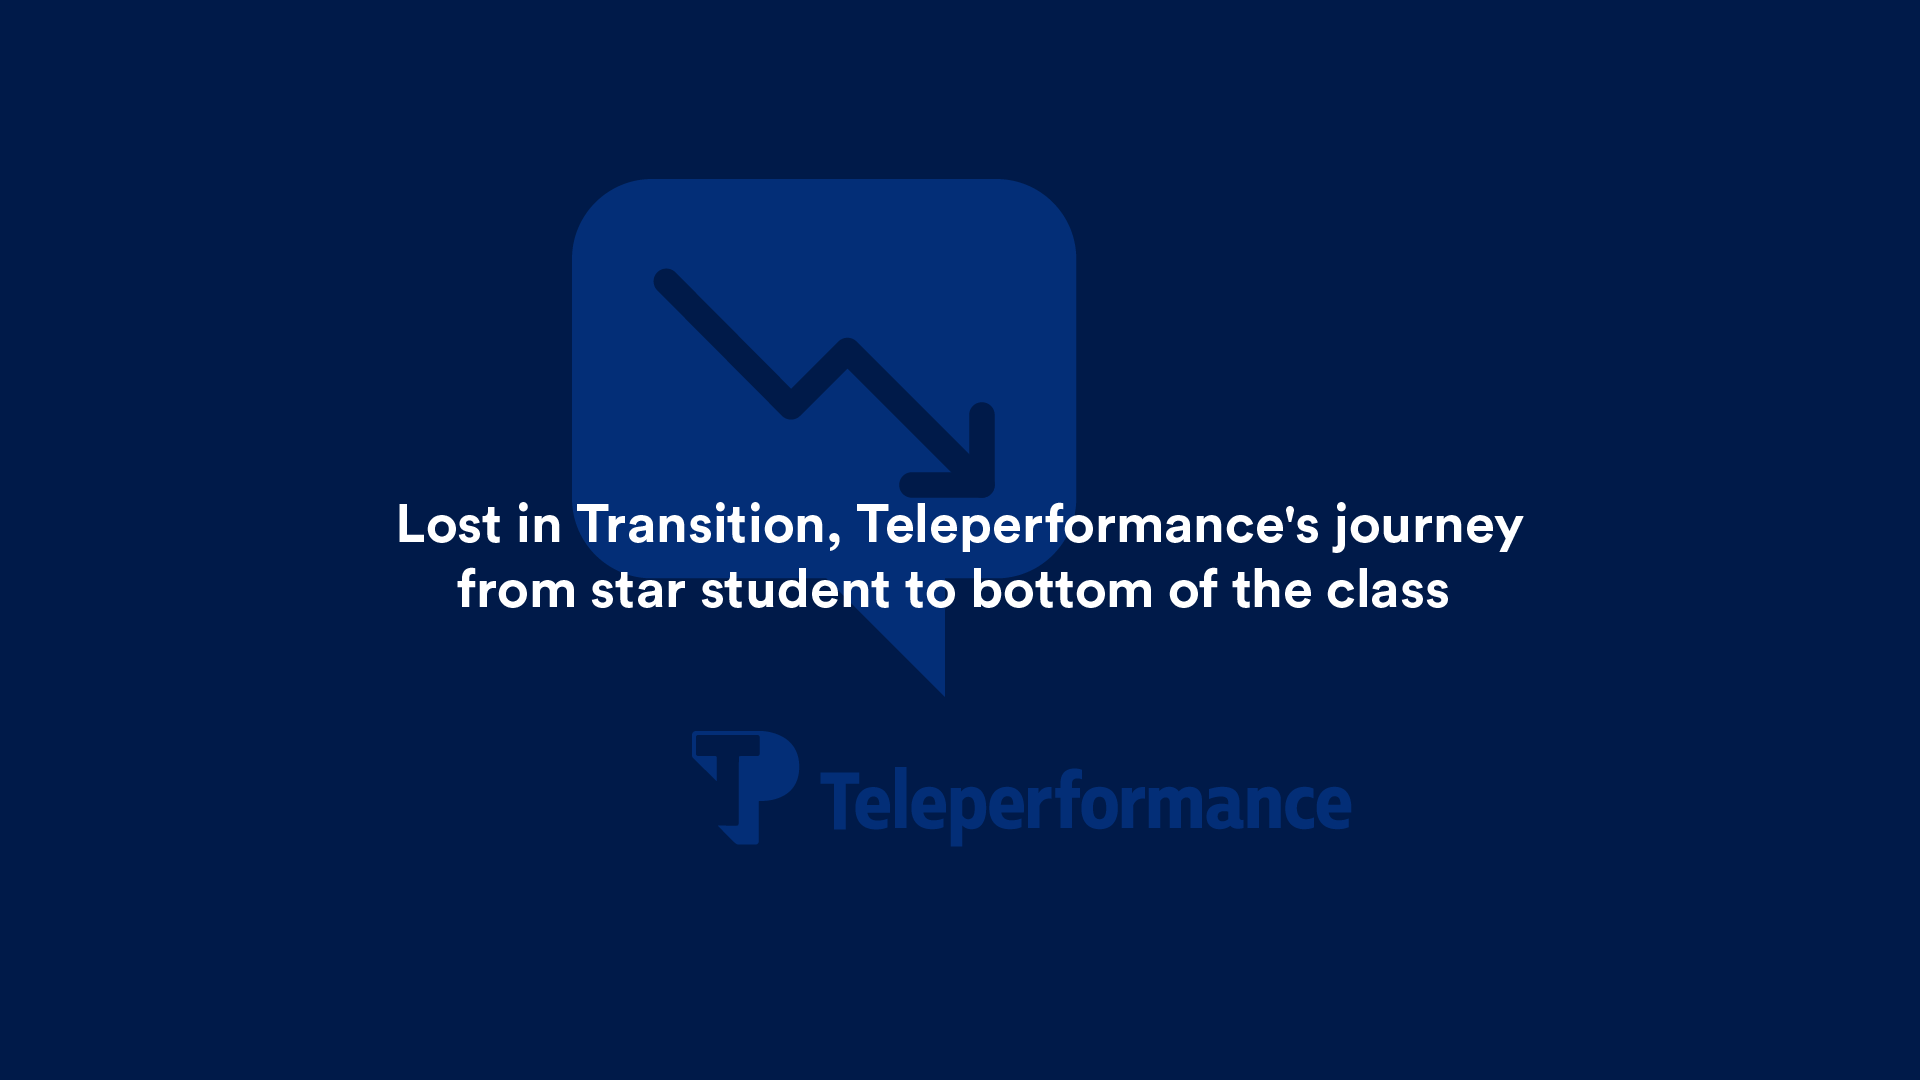 Lost in Transition, Teleperformance’s journey from star student to bottom of the class